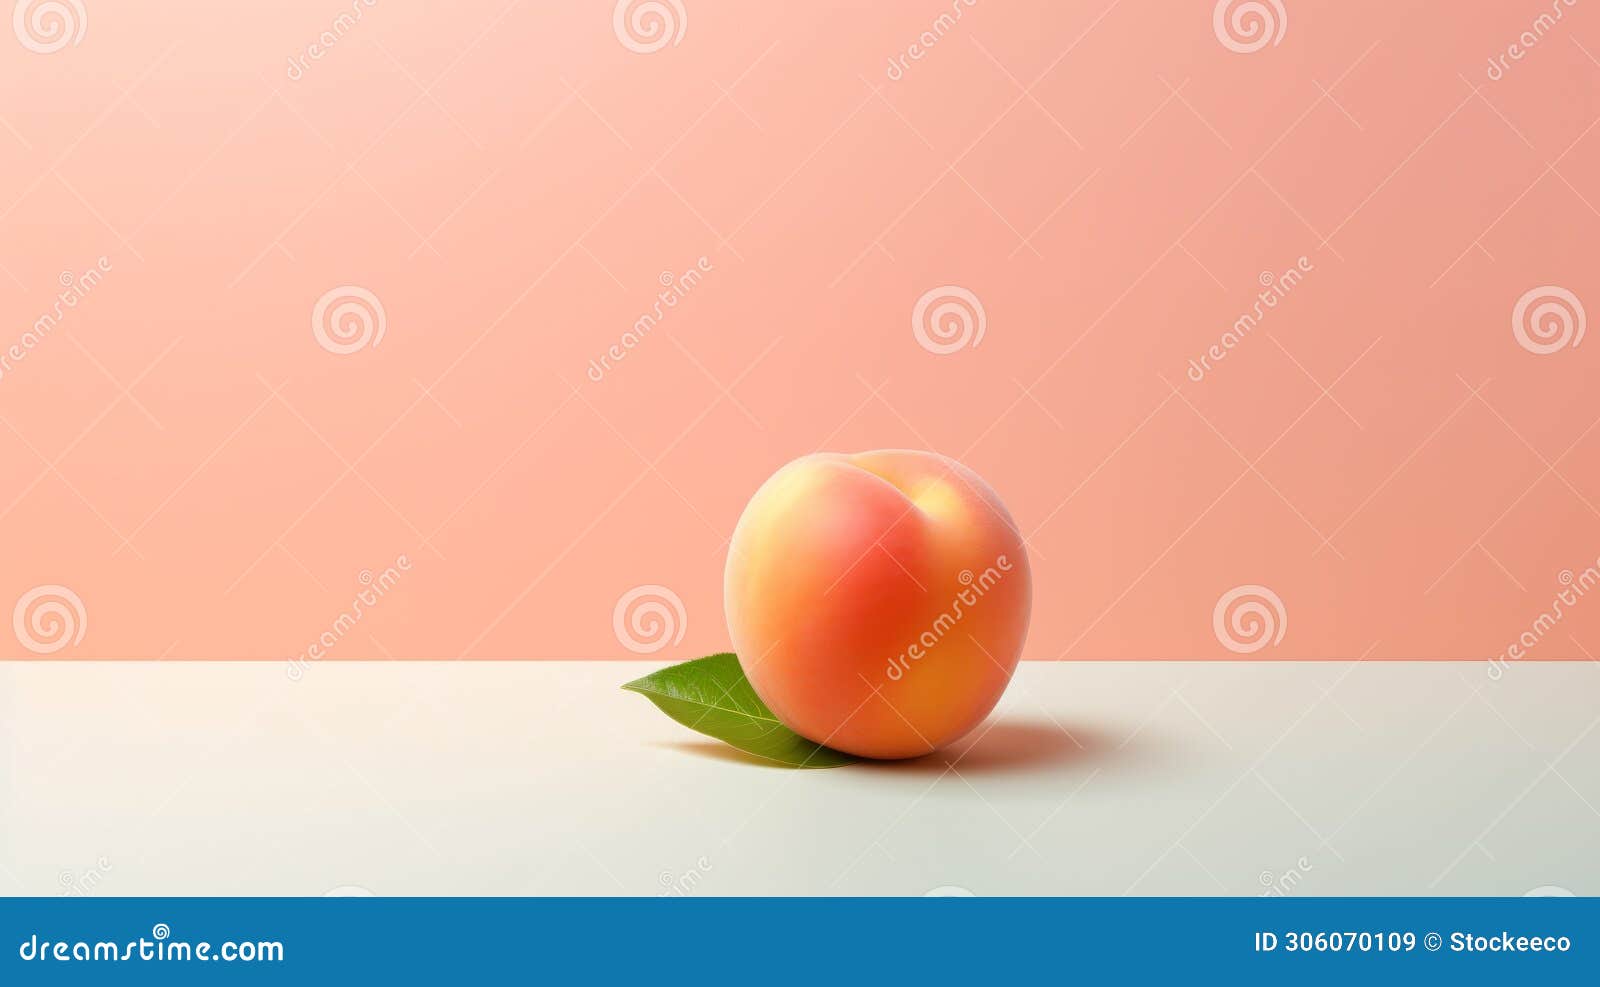 minimalistic peach art with zbrush style and ray tracing